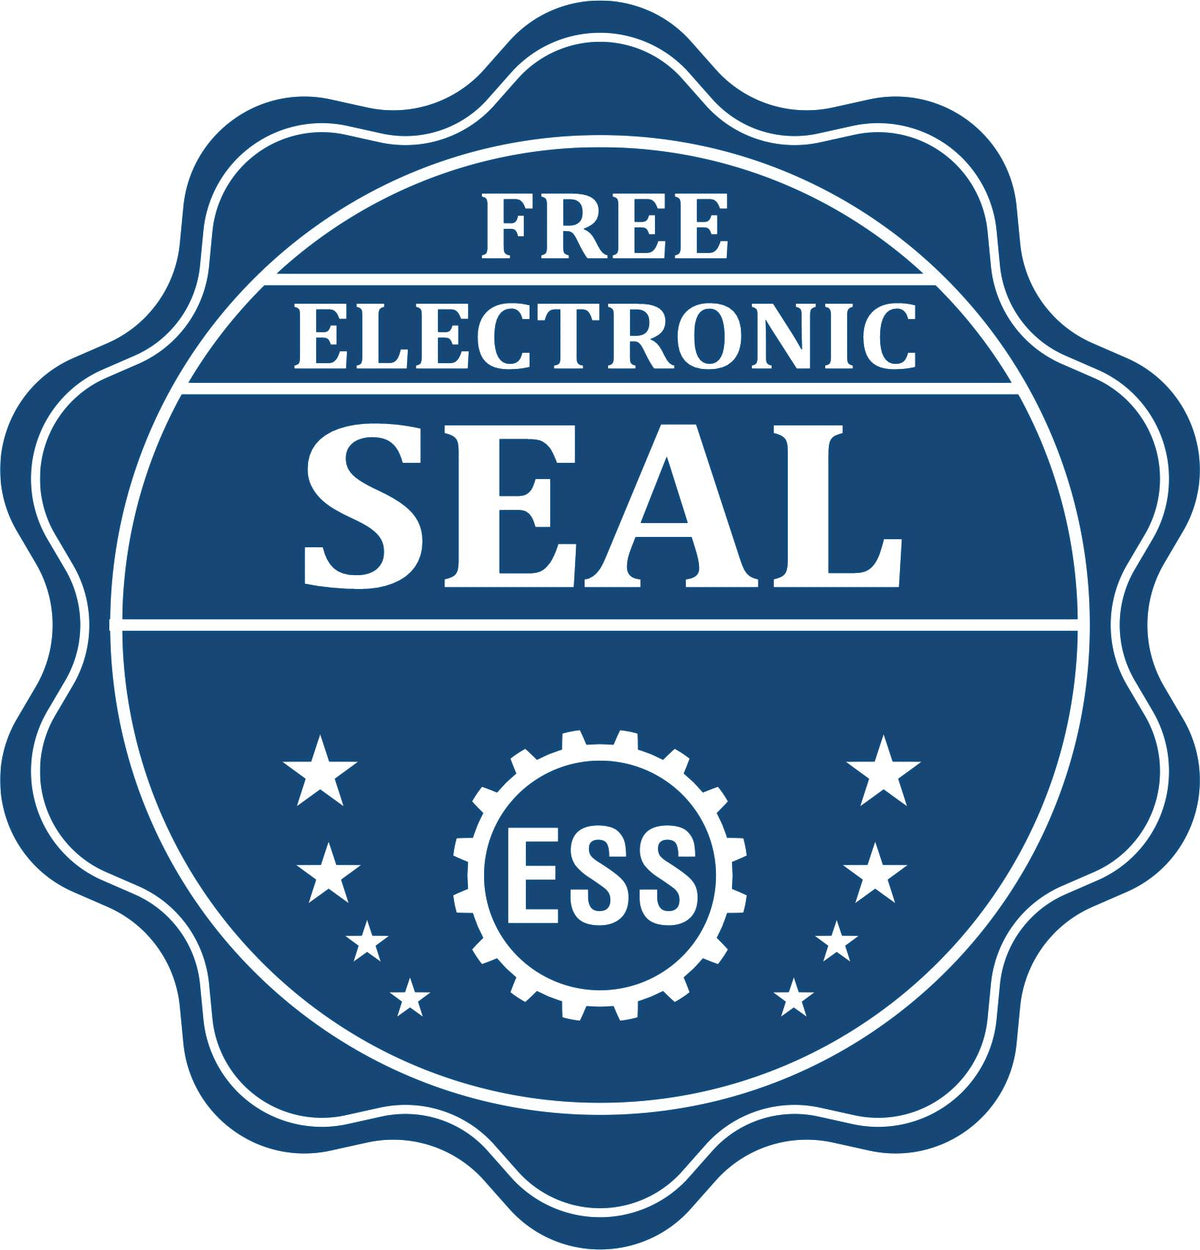 A badge showing a free electronic seal for the State of Guam Soft Land Surveyor Embossing Seal with stars and the ESS gear on the emblem.